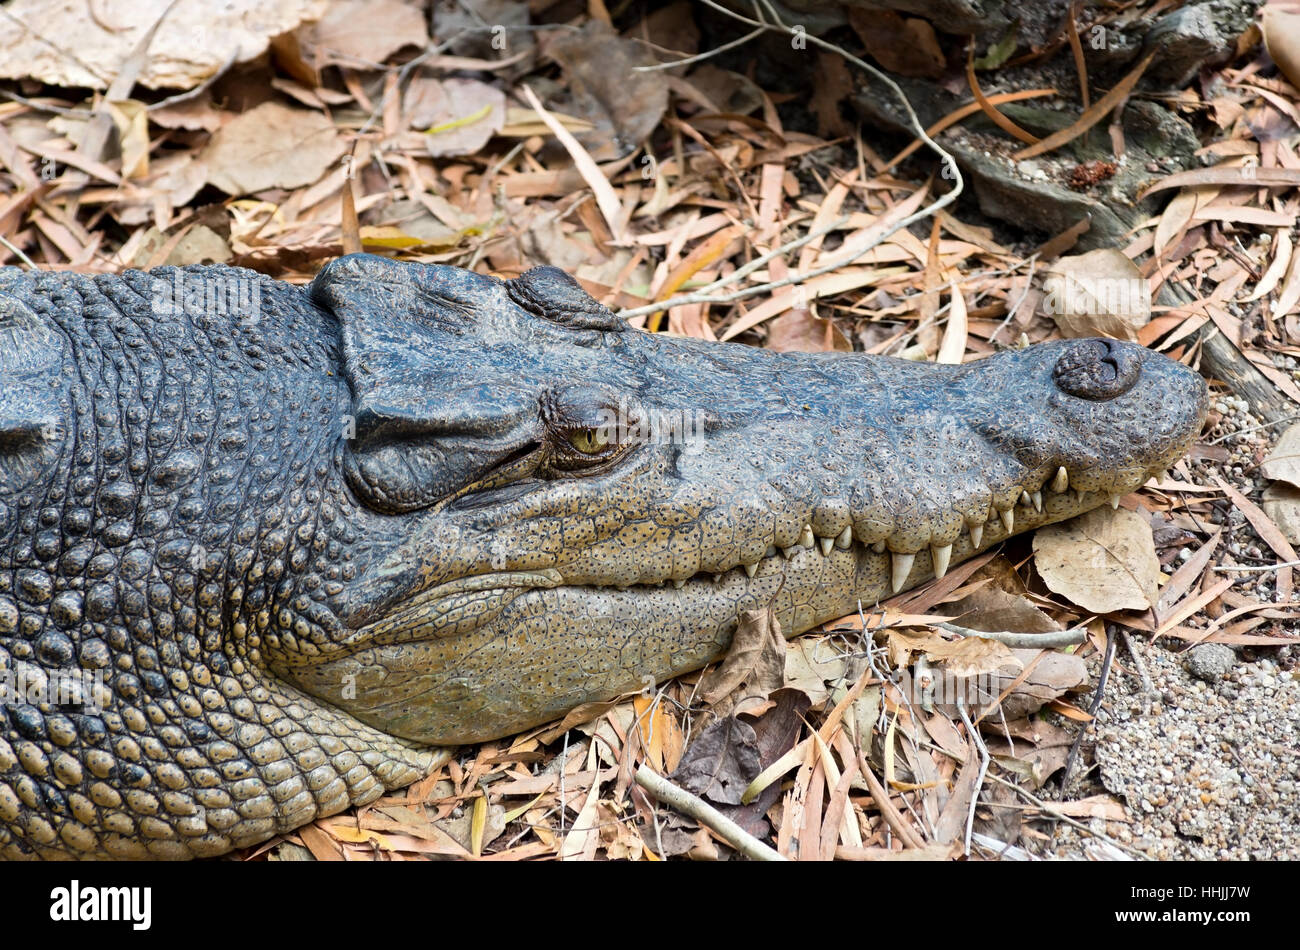 saltwater crocodile or crocodylus porosus closeup of head and snout with teeth protruding from jaws Stock Photo